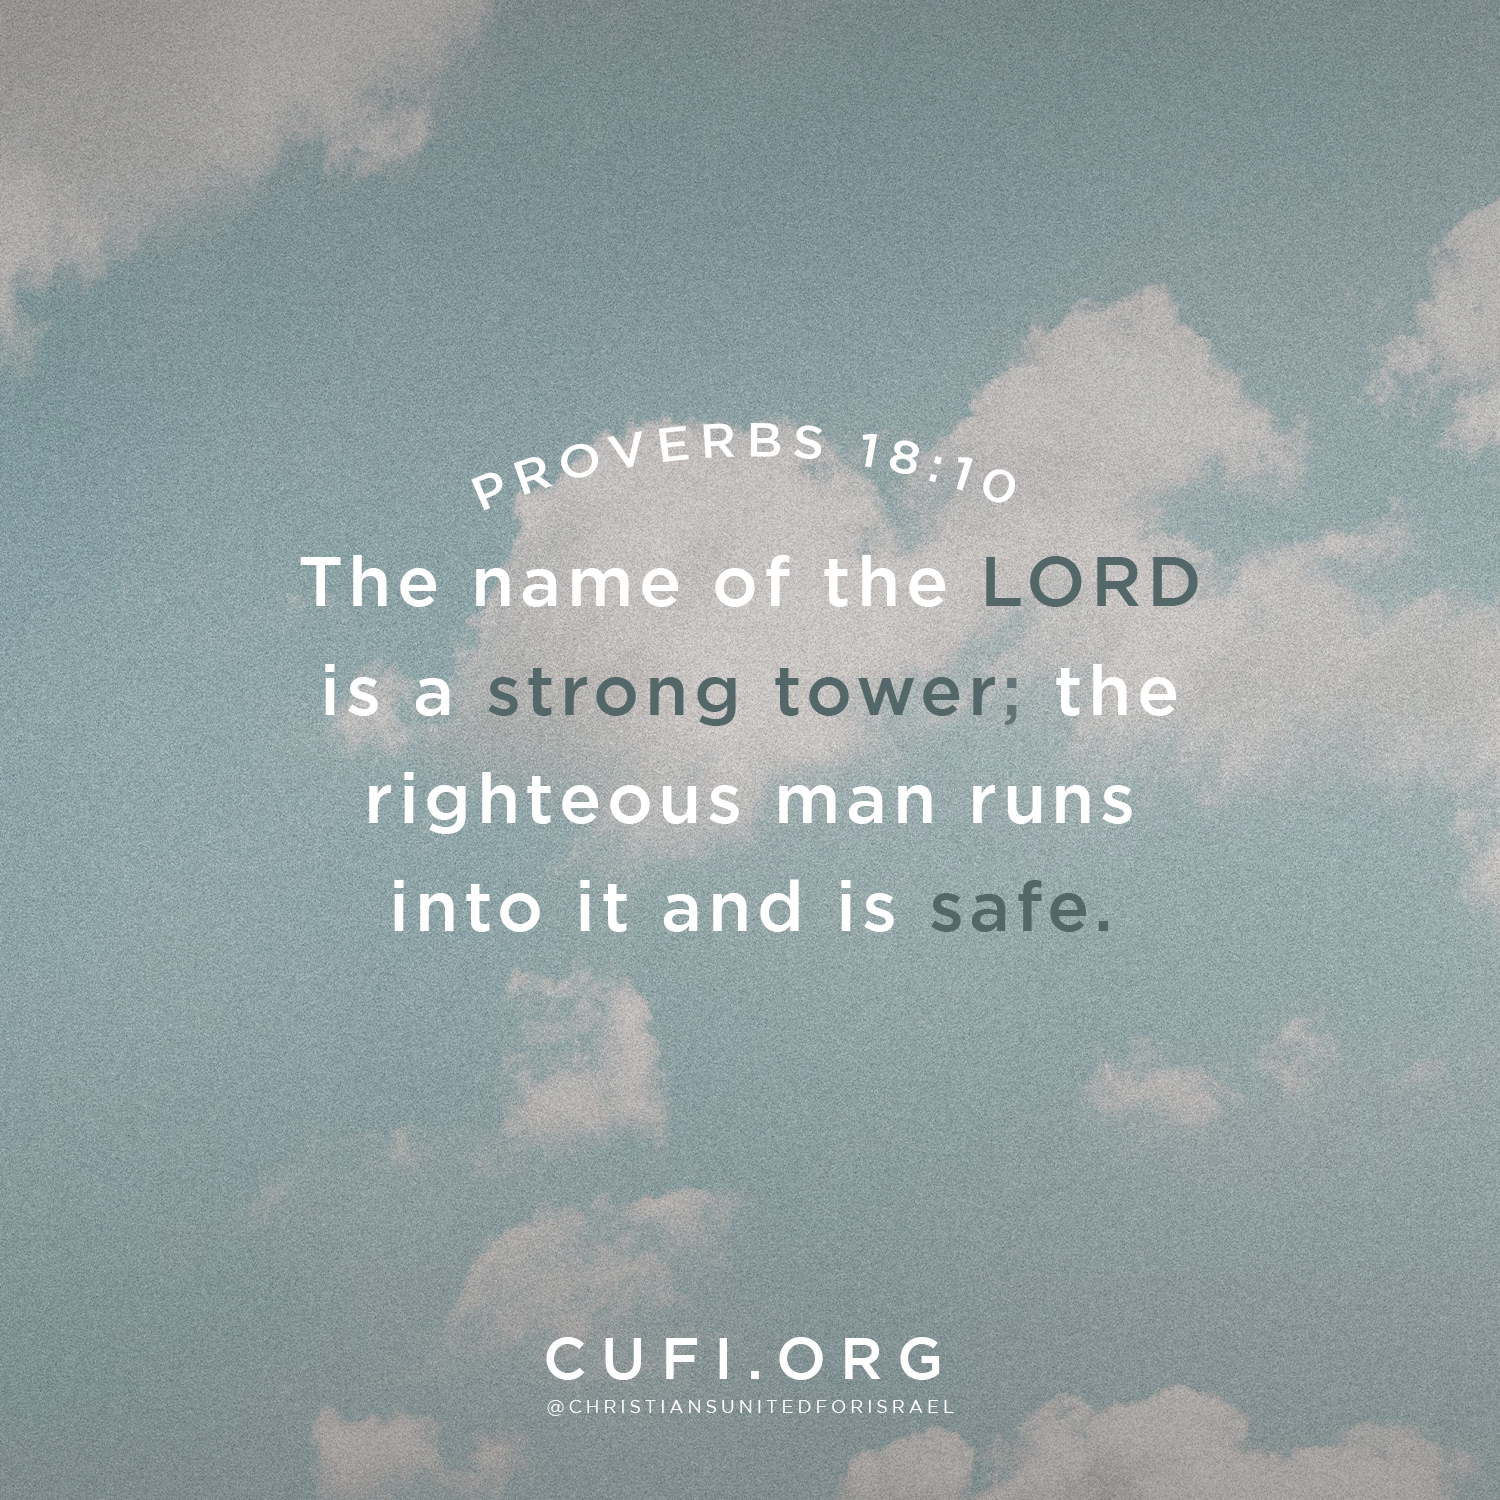 'name PROVERBS 18:10 The of the LORD is a strong tower; the righteous man runs into it and is safe. CUFI.ORG @CHRISTIANSUNITEDFORISRAEL'